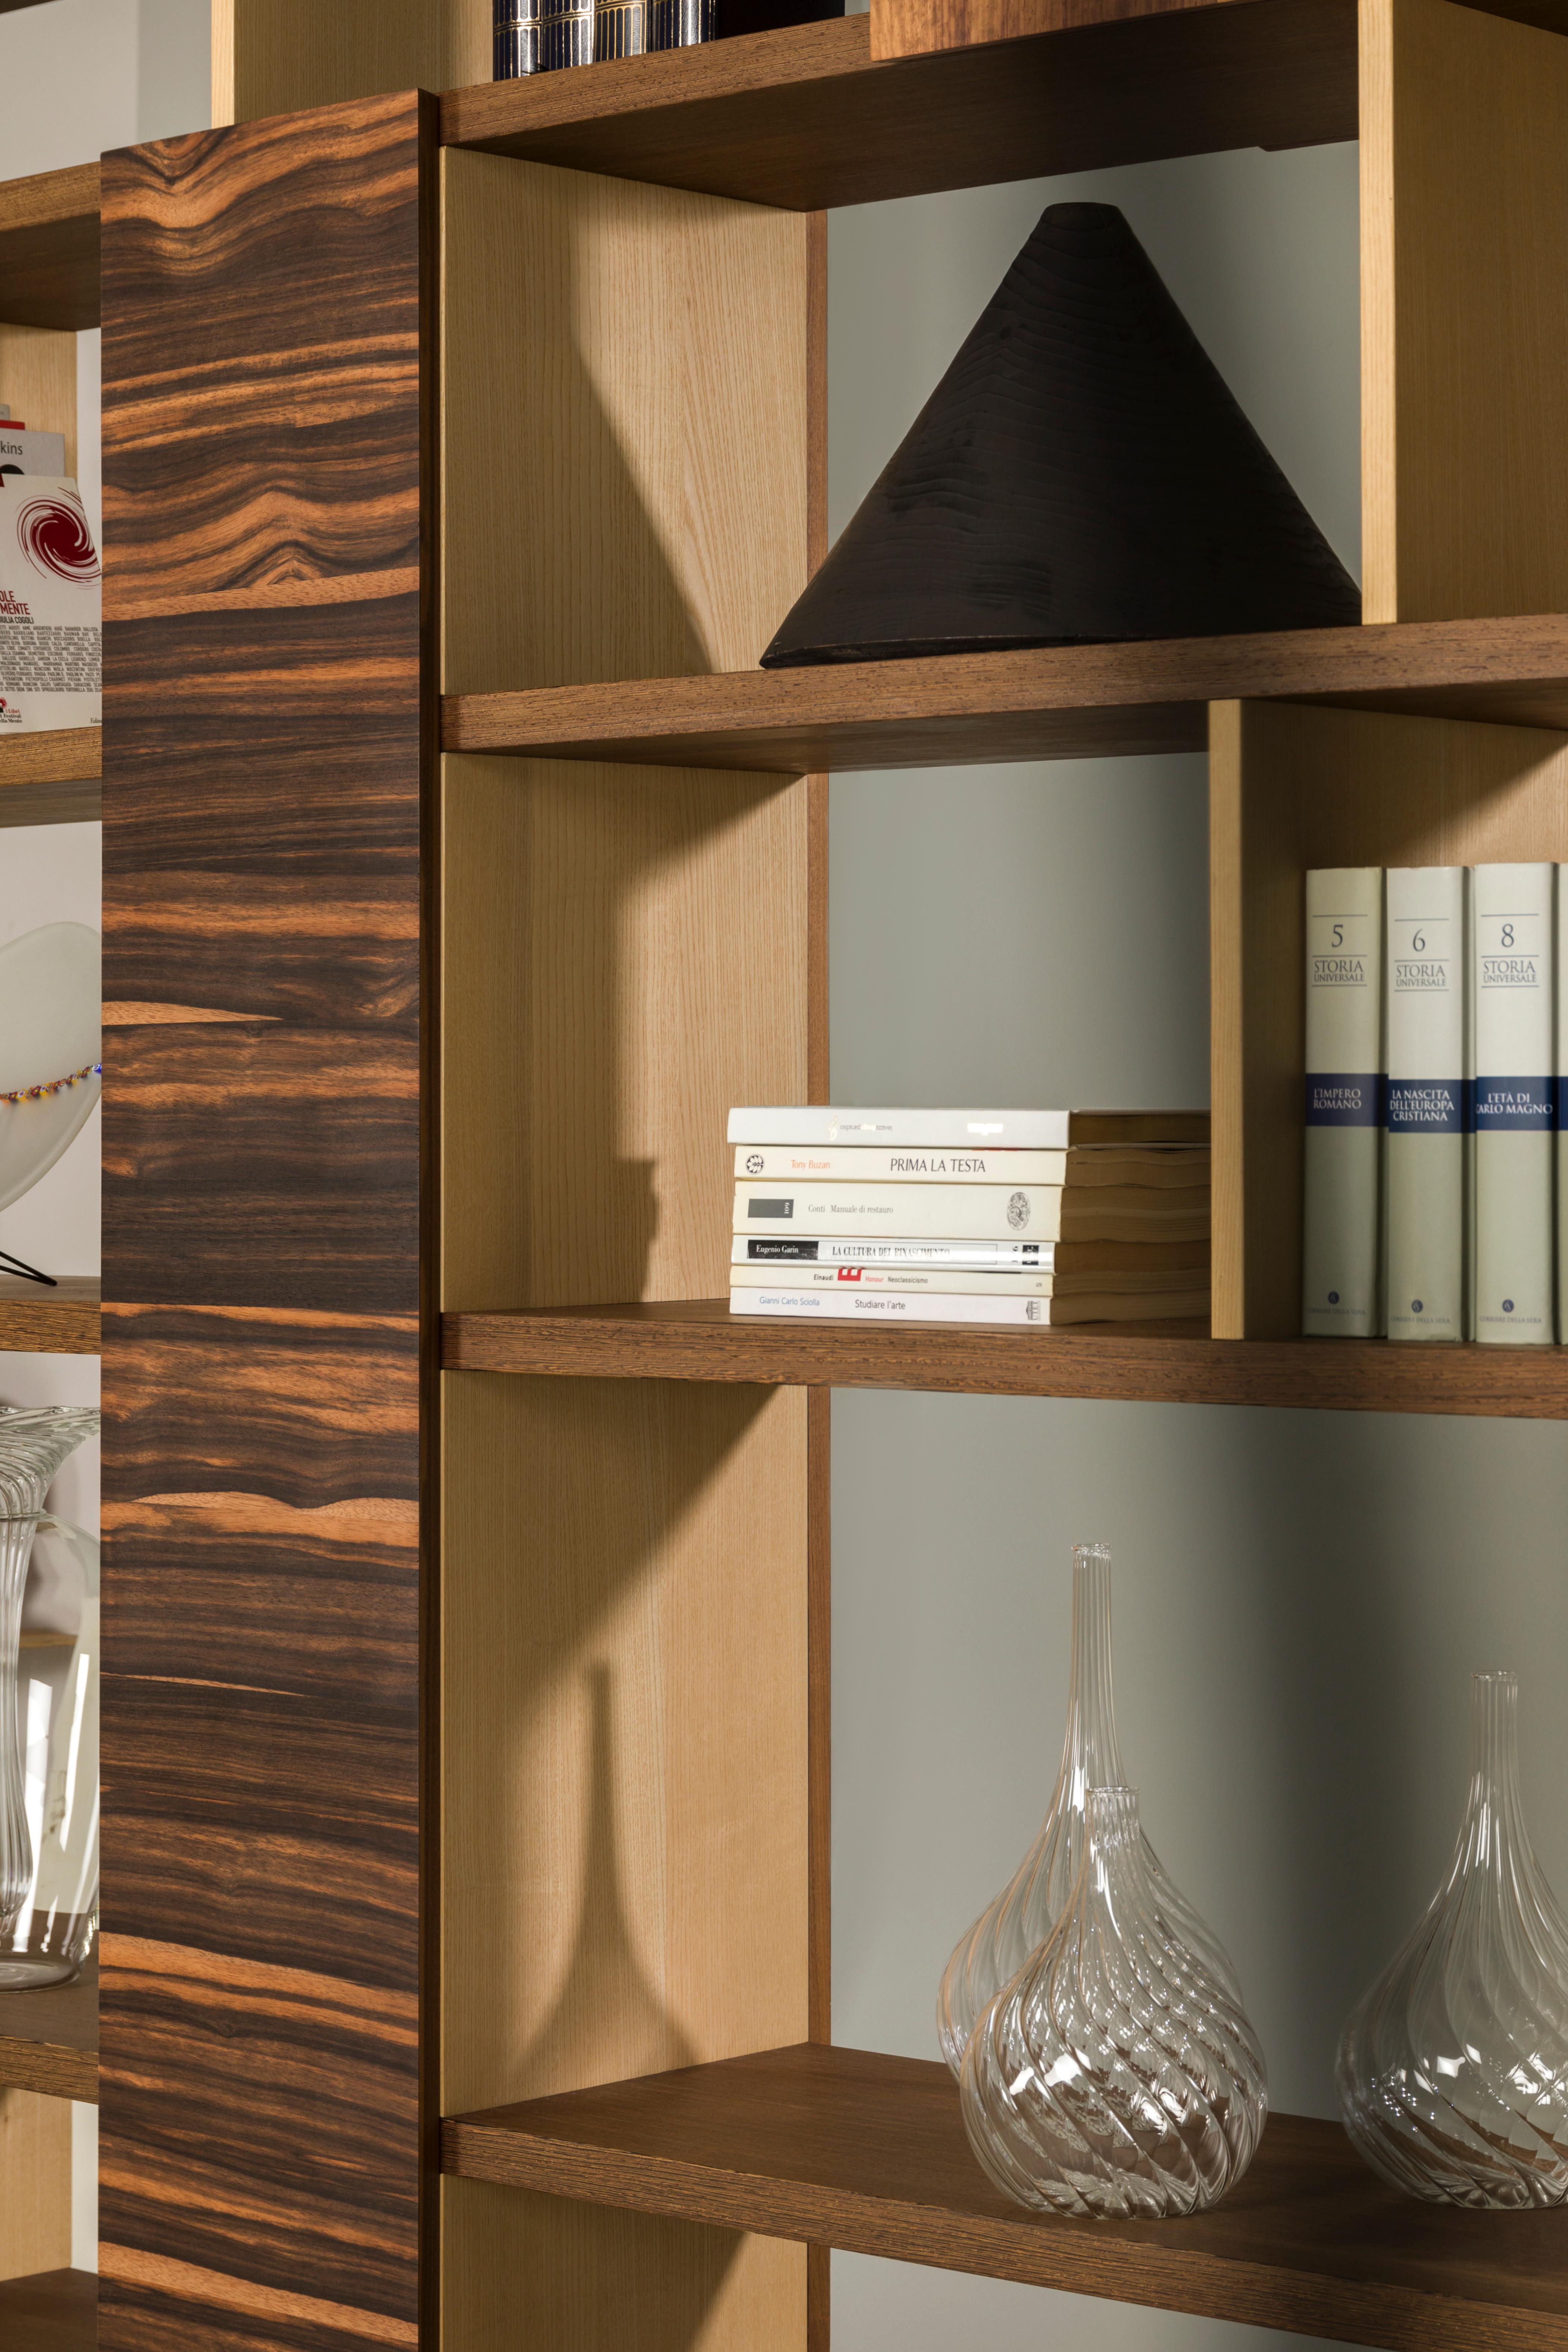 Contemporary Bookshelf with Wood Patchwork on Doors, by Morelato